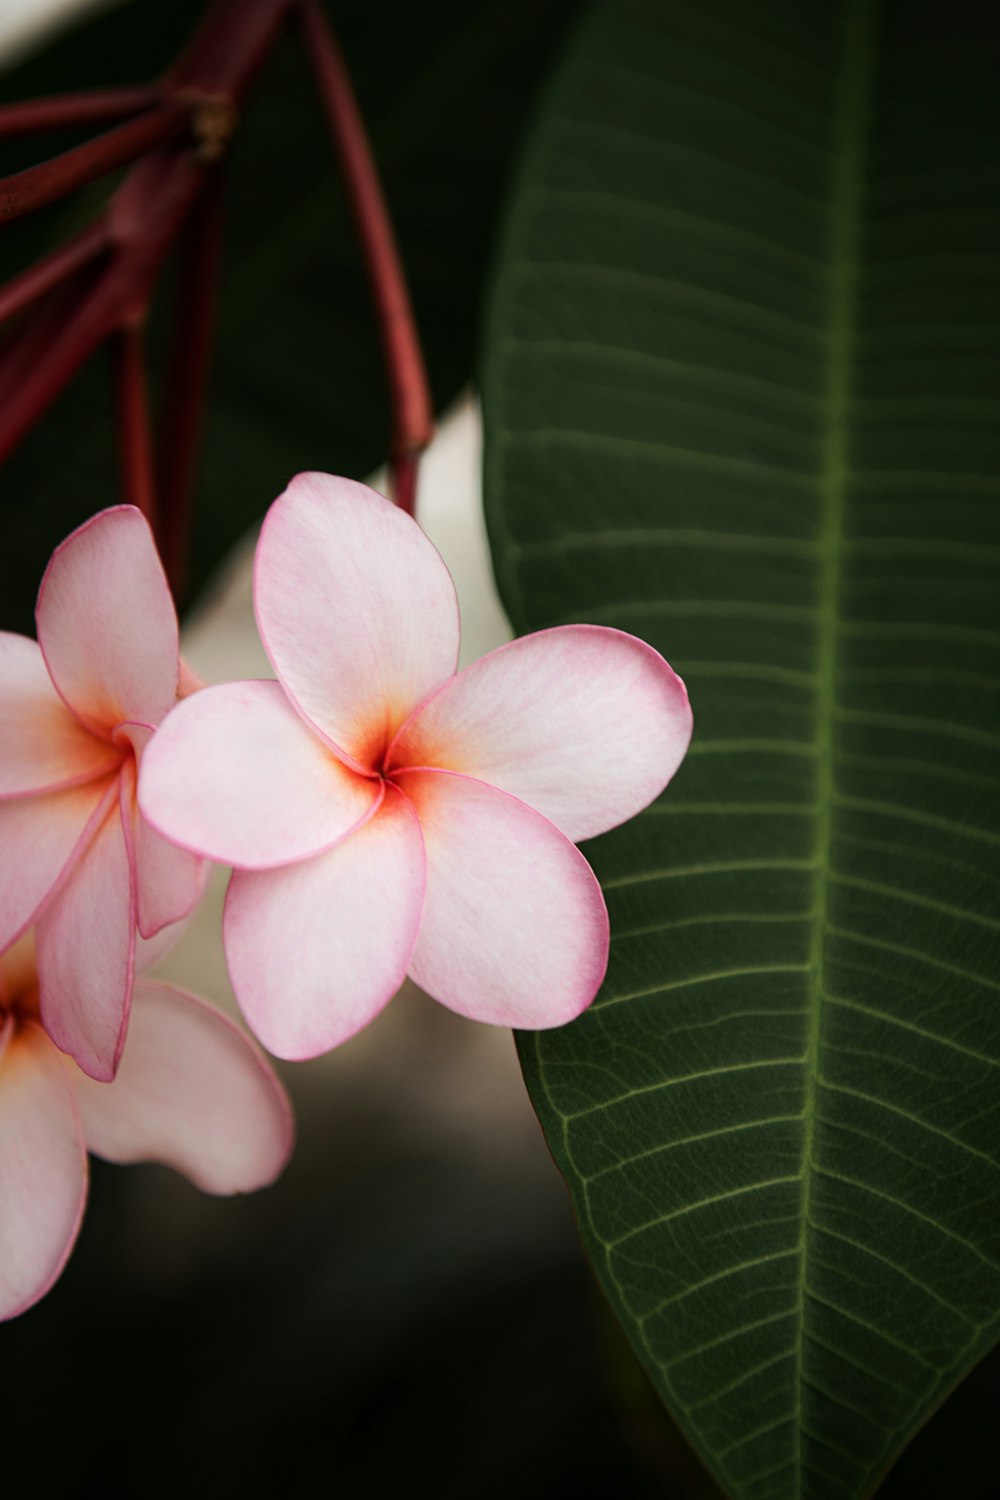 a close up of a pink flower on a green leaf